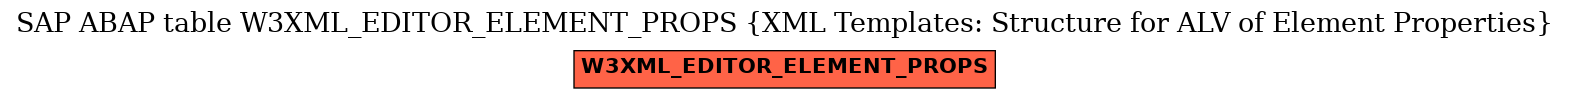 E-R Diagram for table W3XML_EDITOR_ELEMENT_PROPS (XML Templates: Structure for ALV of Element Properties)